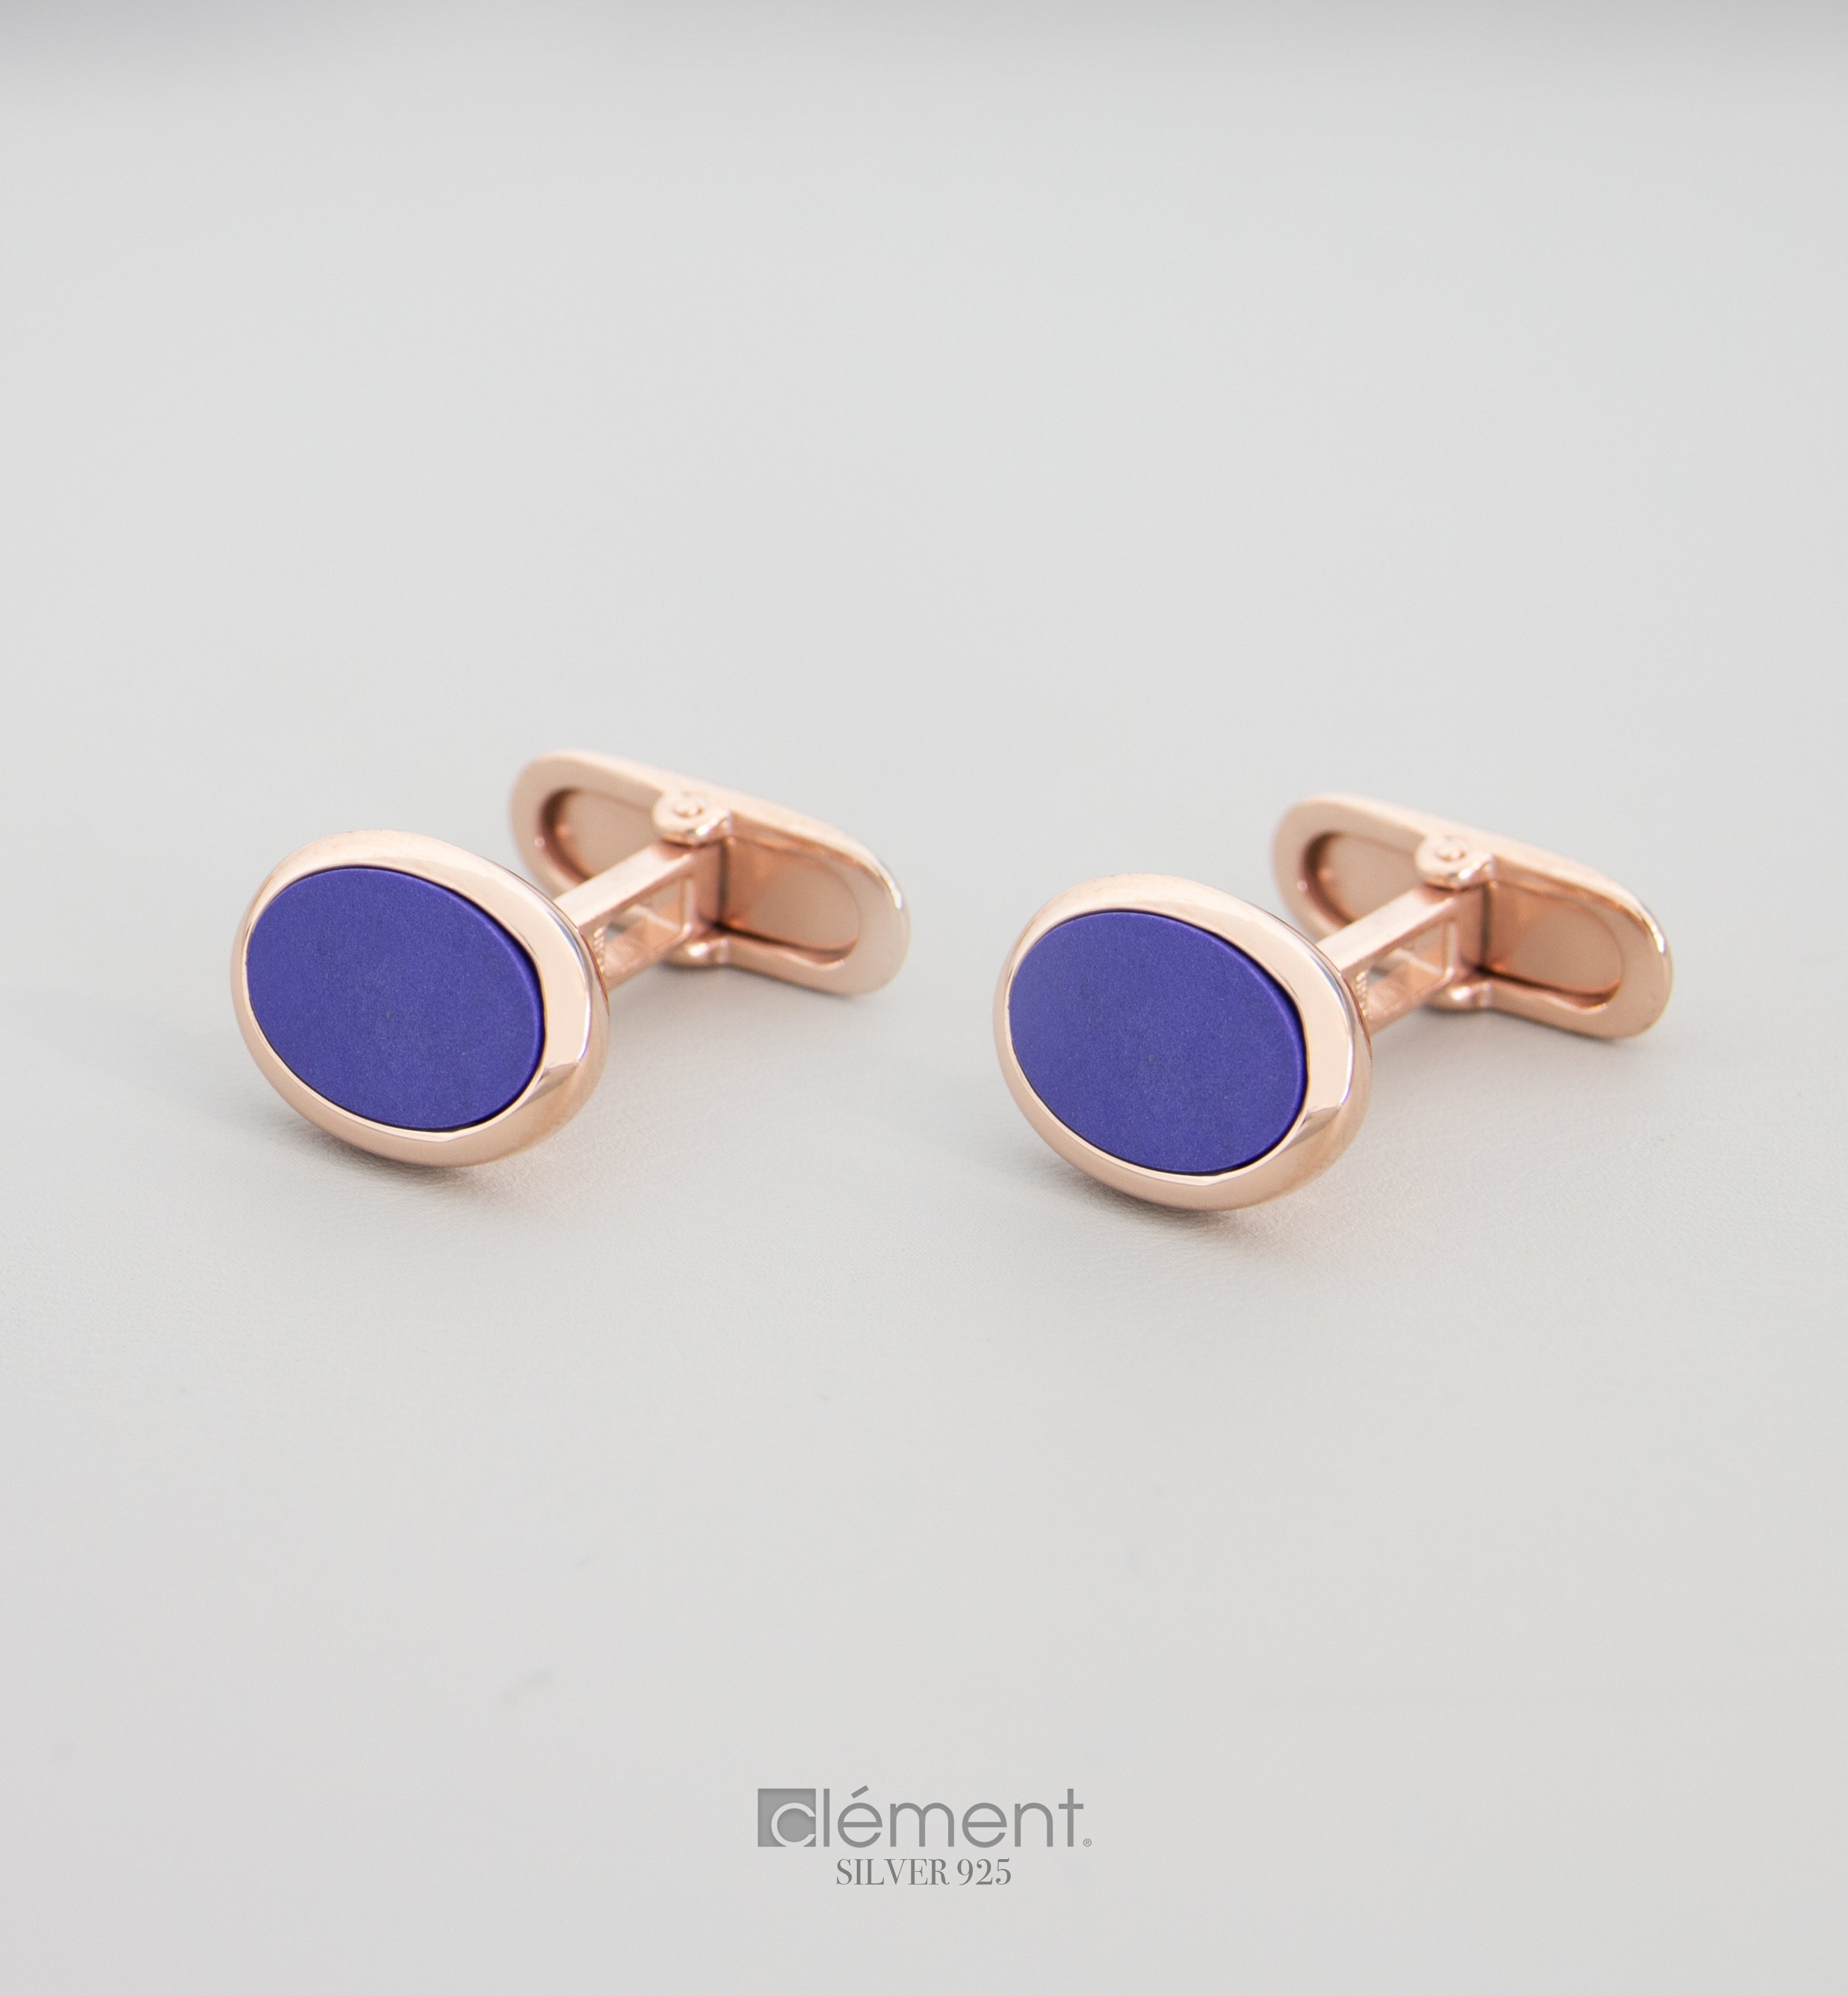 Silver 925 Rose Gold Plated Oval Cufflinks